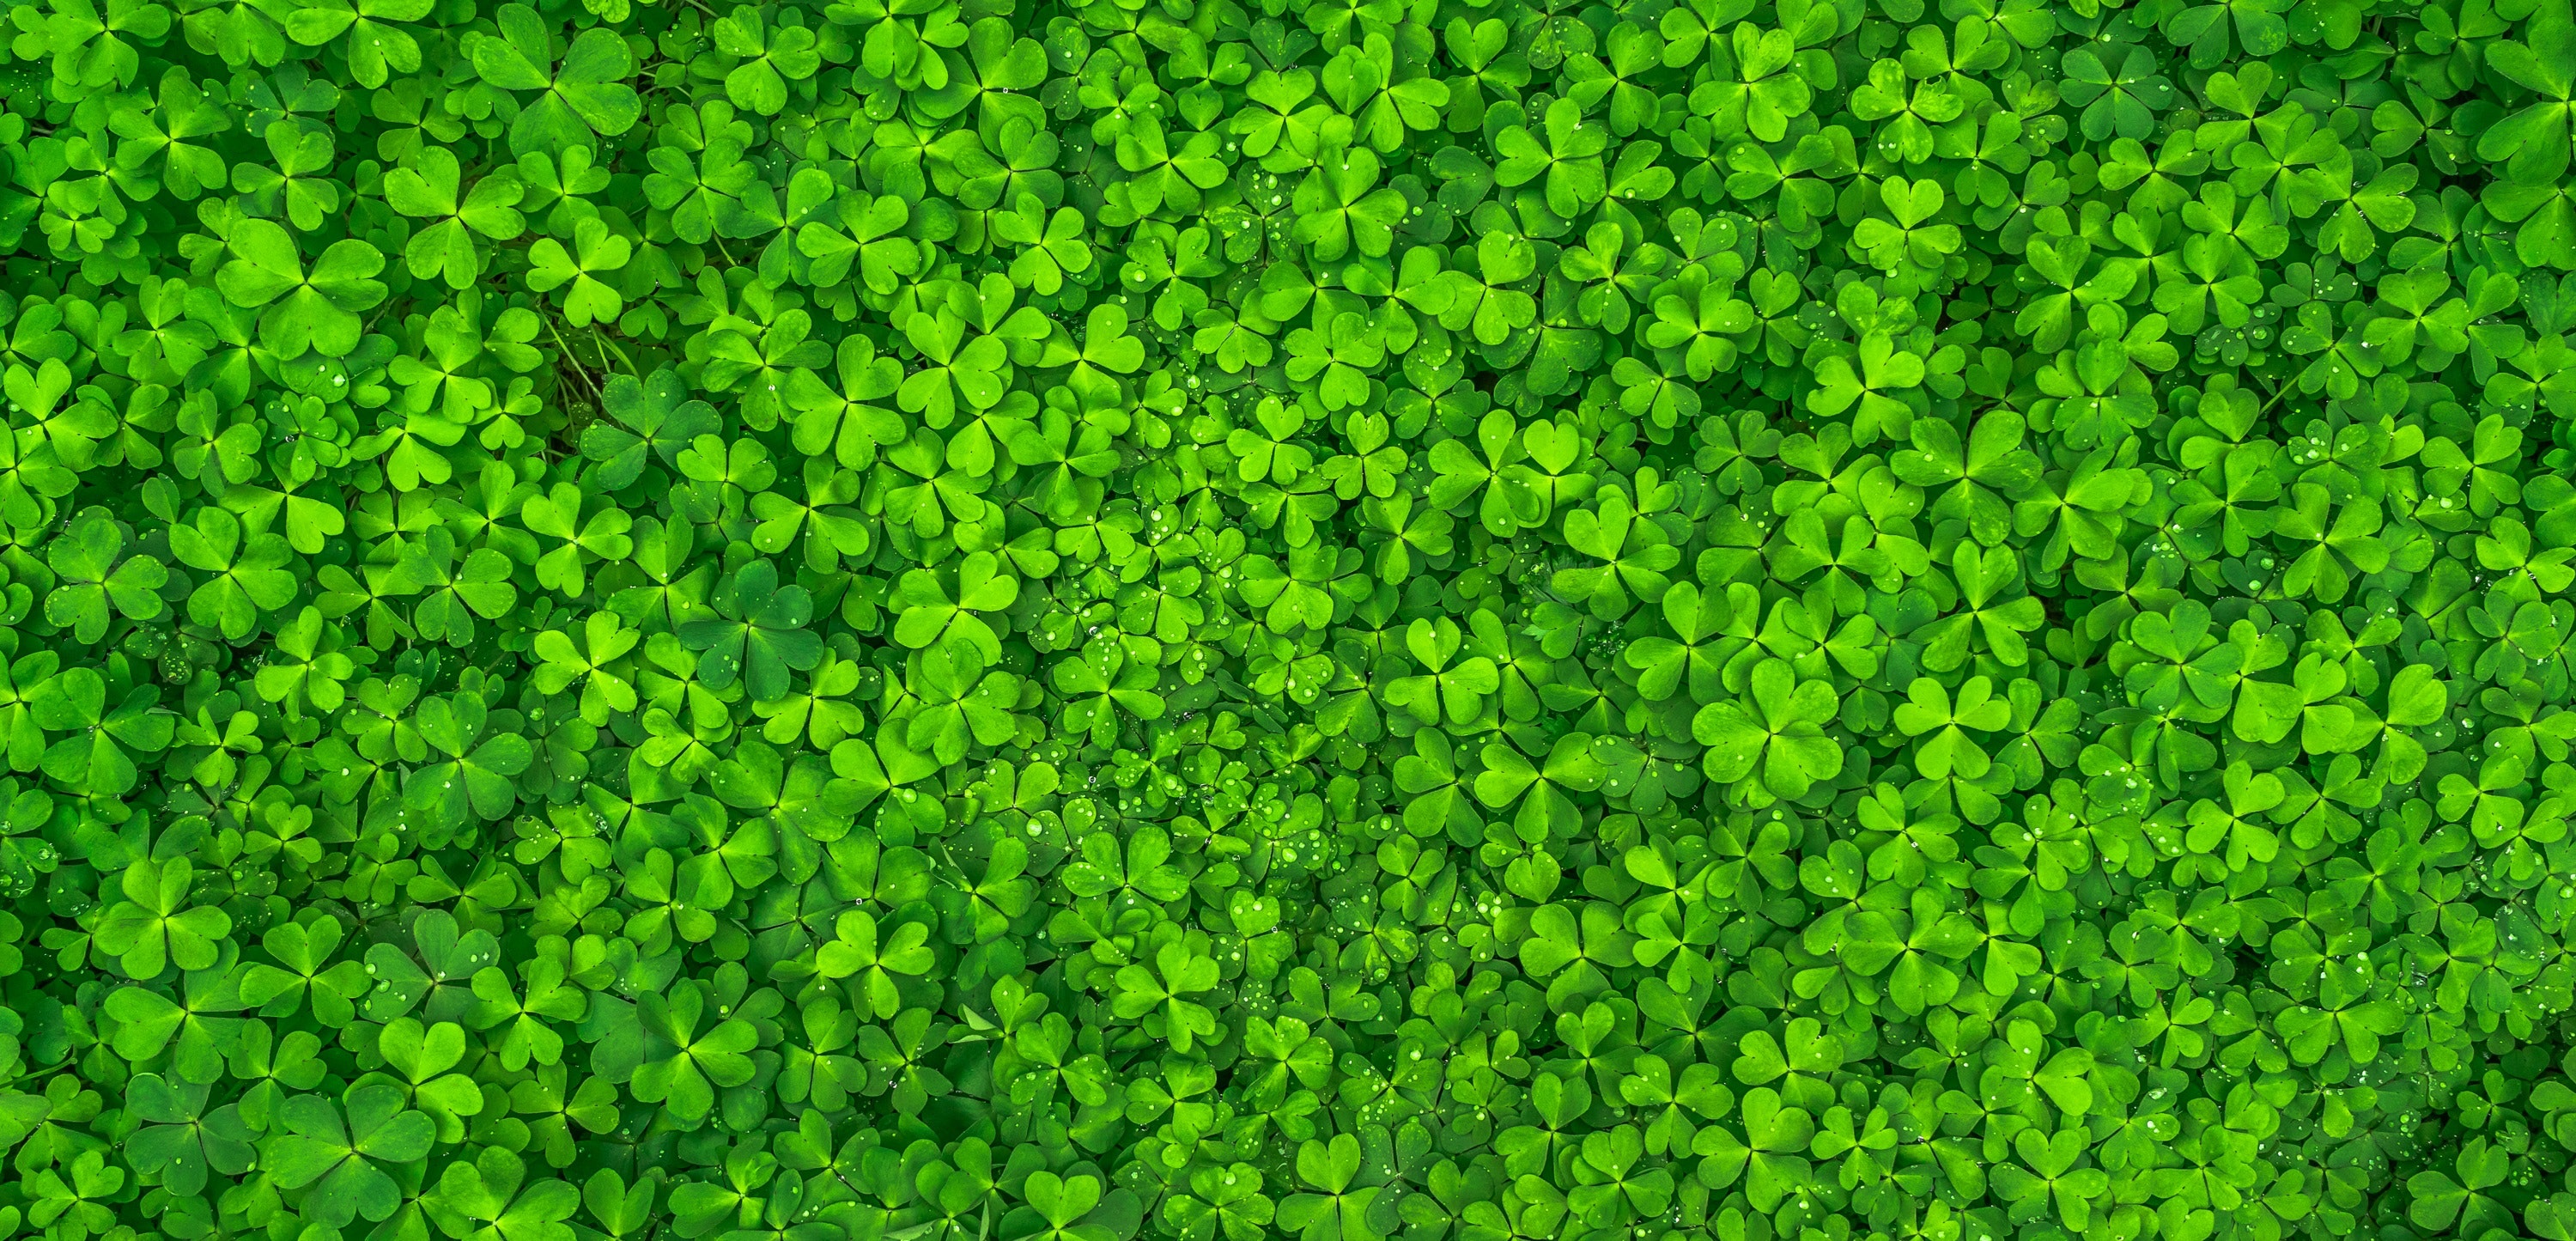 Top view photo of clover leaves